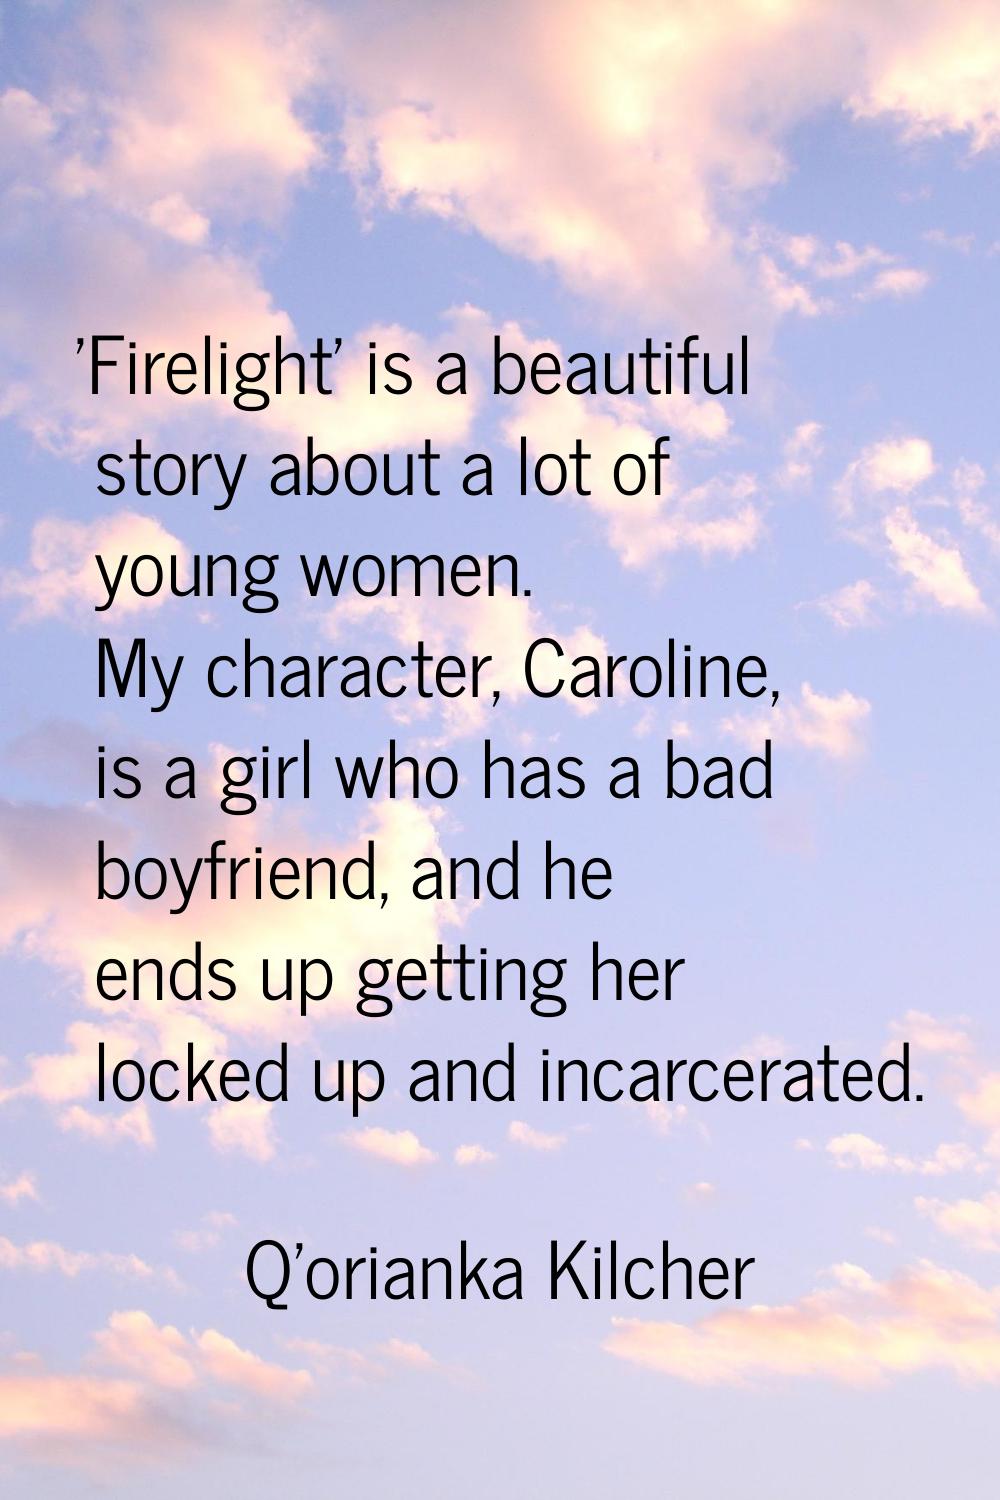 'Firelight' is a beautiful story about a lot of young women. My character, Caroline, is a girl who 